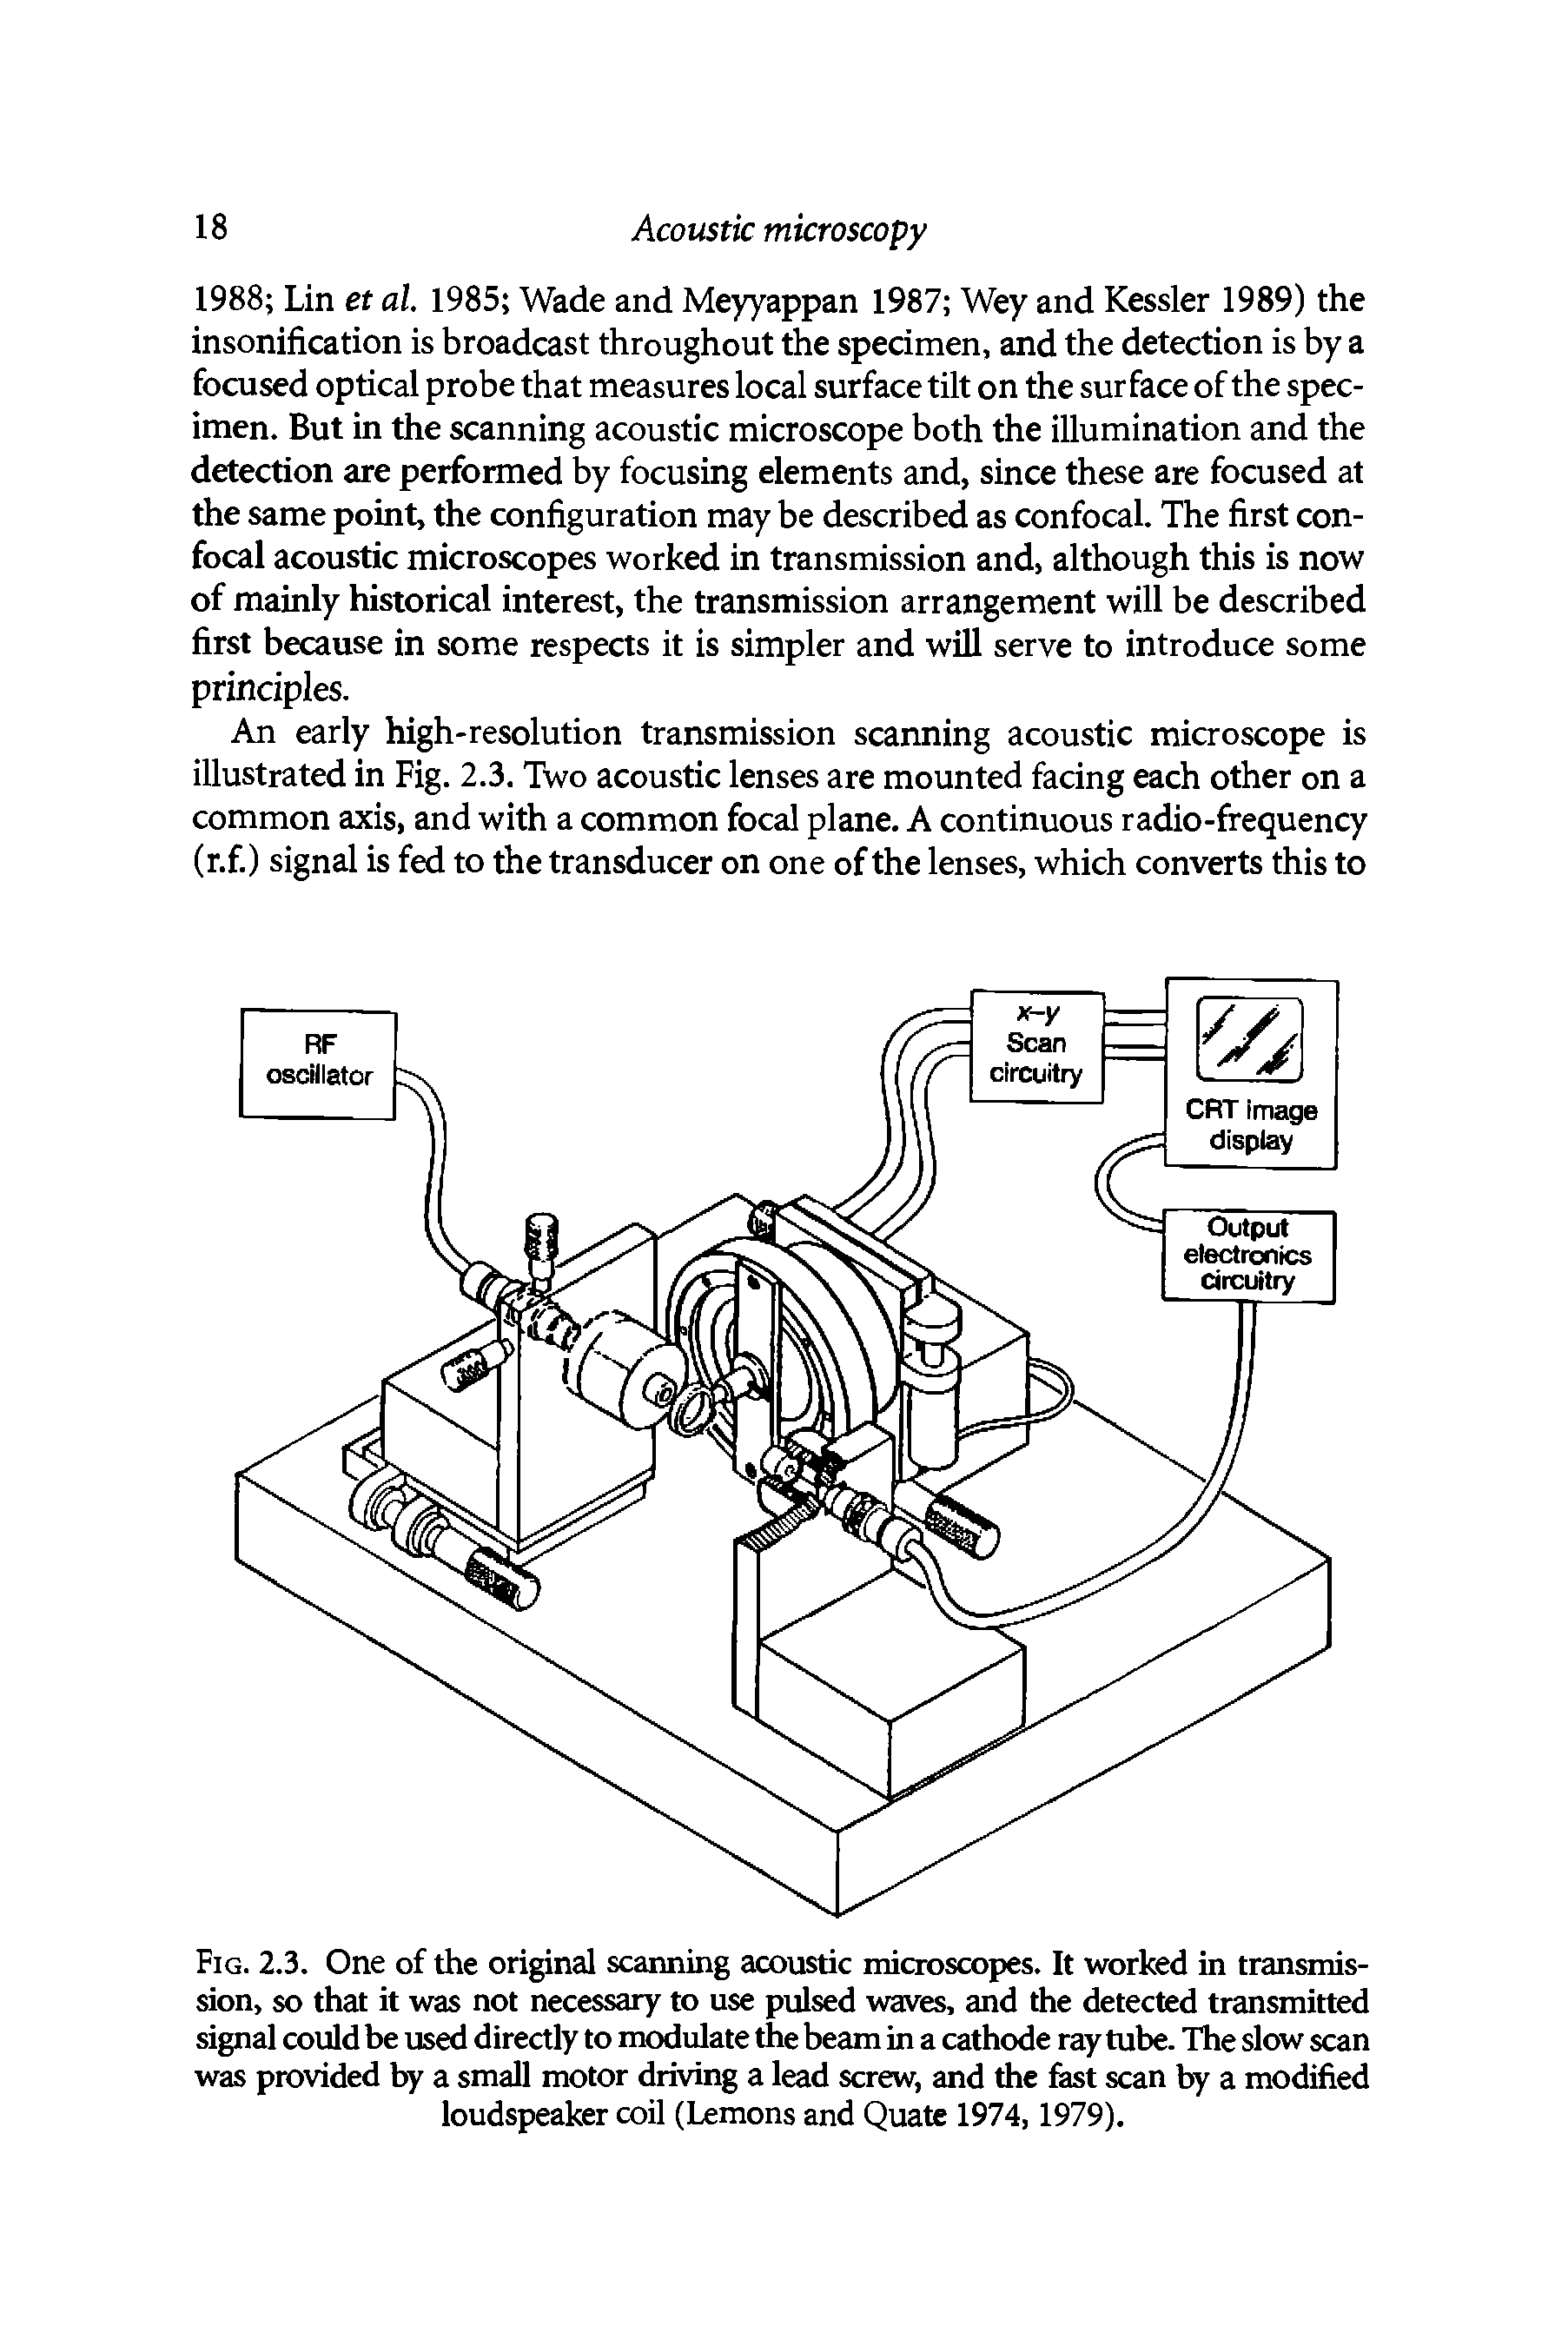 Fig. 2.3. One of the original scanning acoustic microscopes. It worked in transmission, so that it was not necessary to use pulsed waves, and the detected transmitted signal could be used directly to modulate the beam in a cathode ray tube. The slow scan was provided by a small motor driving a lead screw, and the fast scan by a modified loudspeaker coil (Lemons and Quate 1974,1979).